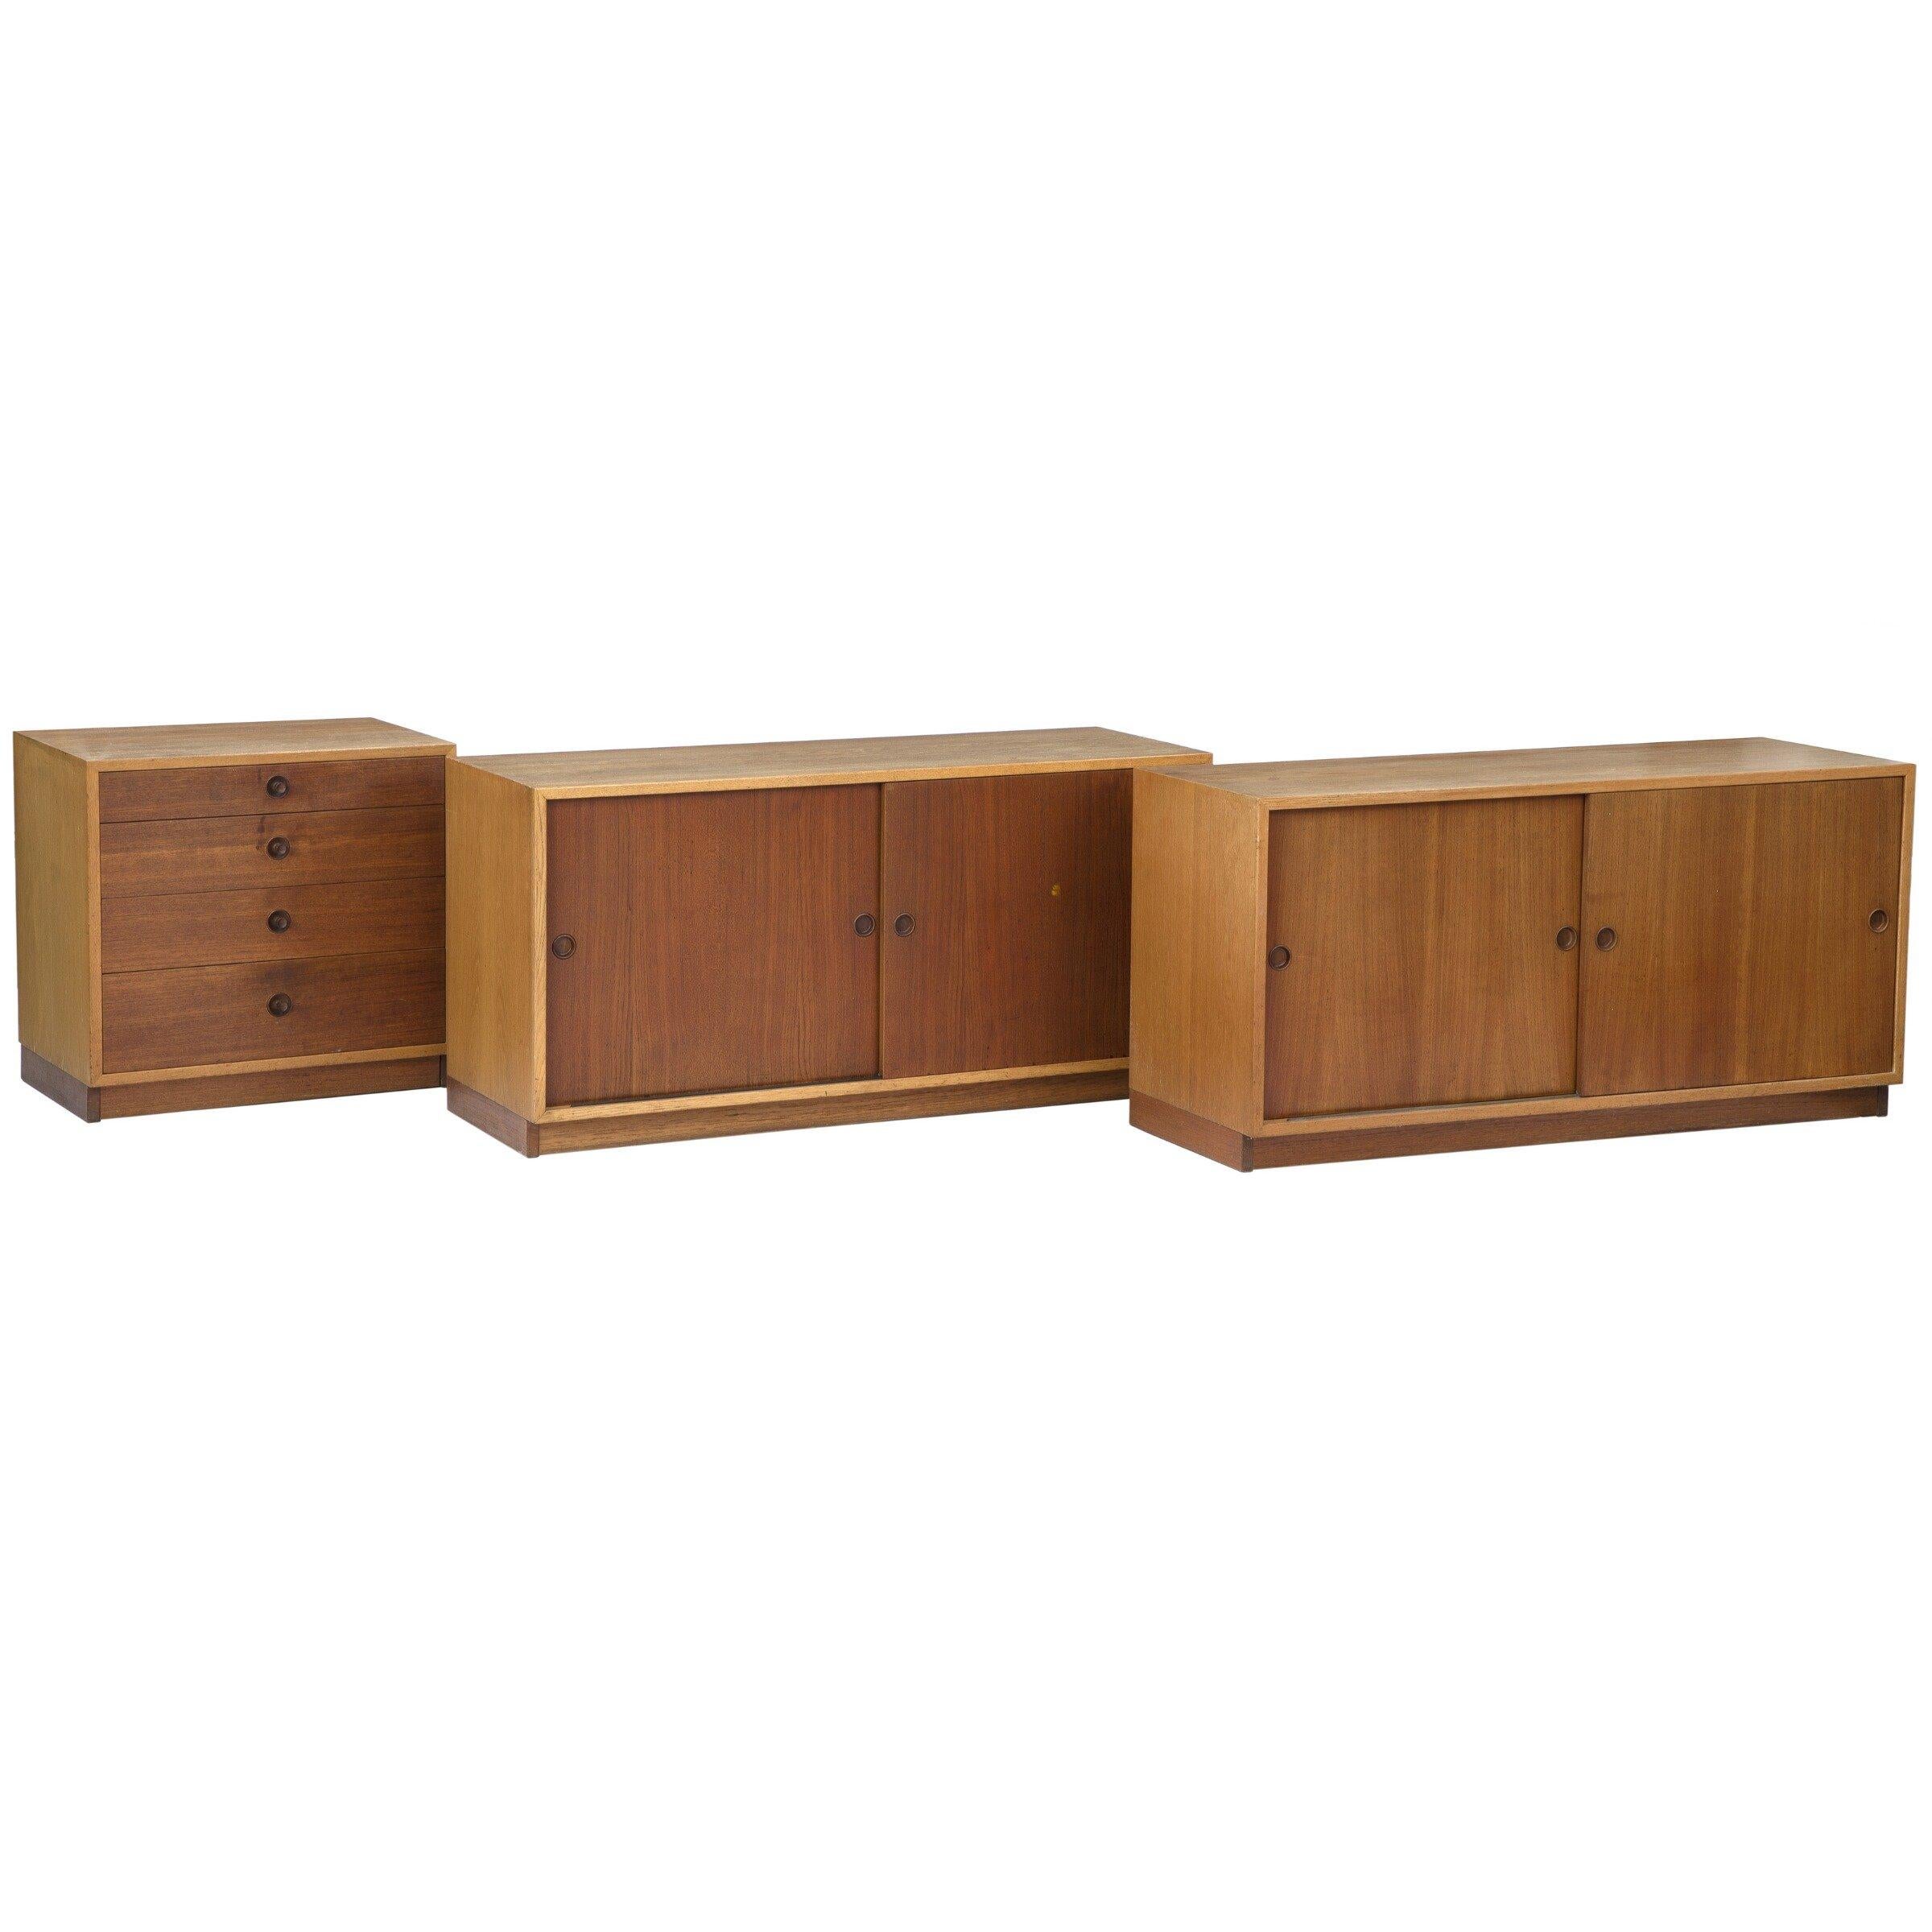 Description: Set of three- two cabinets and one chest of drawers of oak with Sliding doors and drawer fronts of teak. Manufactured by Karl Andersson & Söner.

Designer: Børge Mogensen

Cabinets dimensions: 53 W x 18 D x 26 H

Chest of drawers